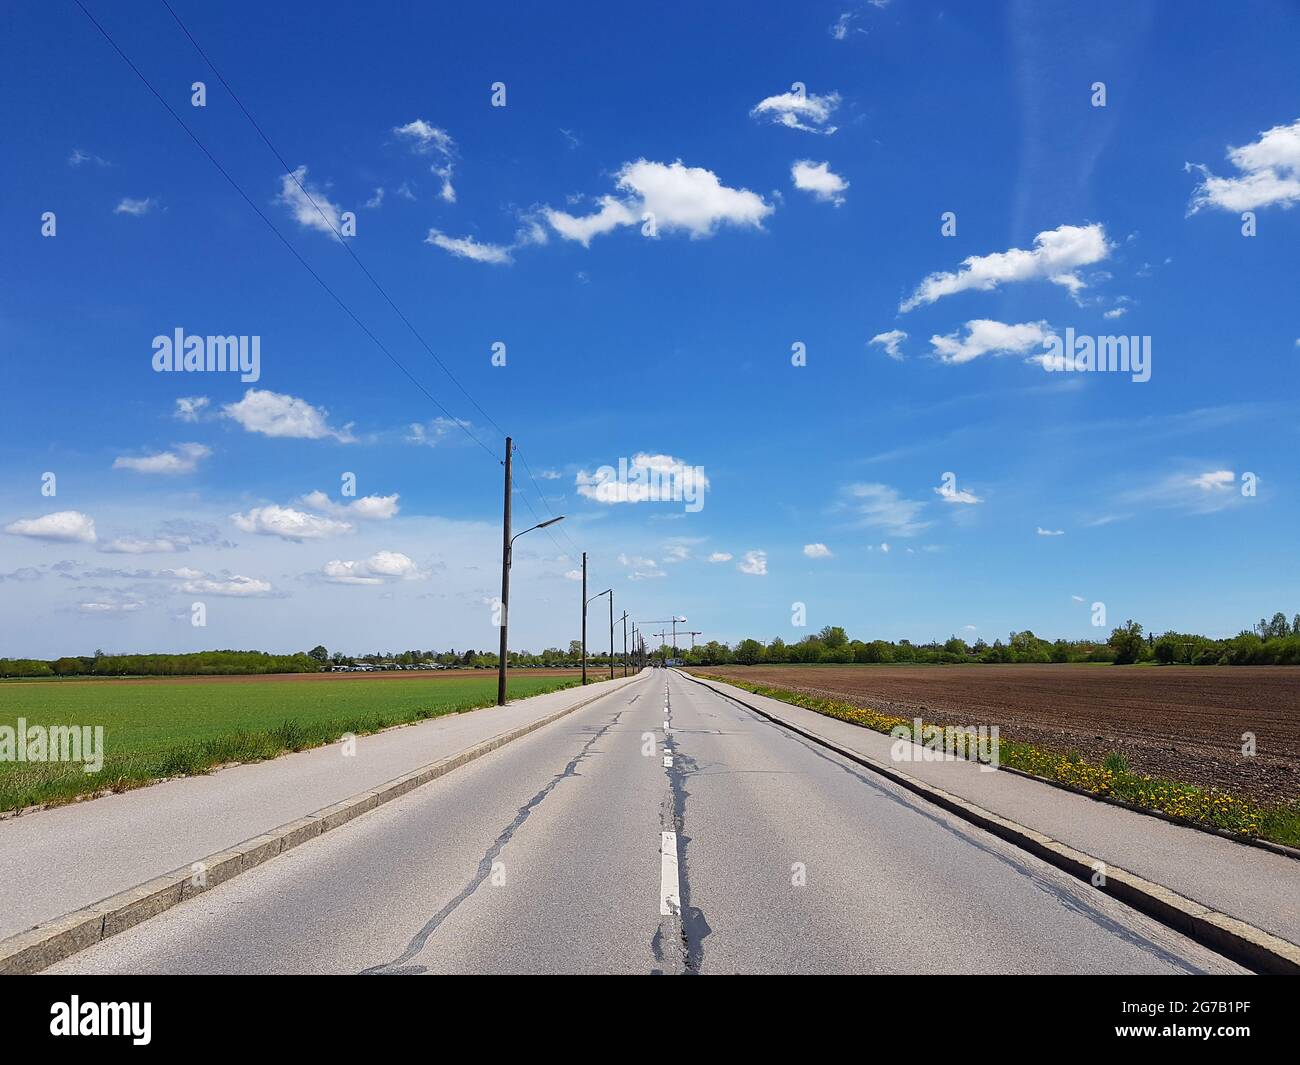 Blue sky with clouds and country road Stock Photo